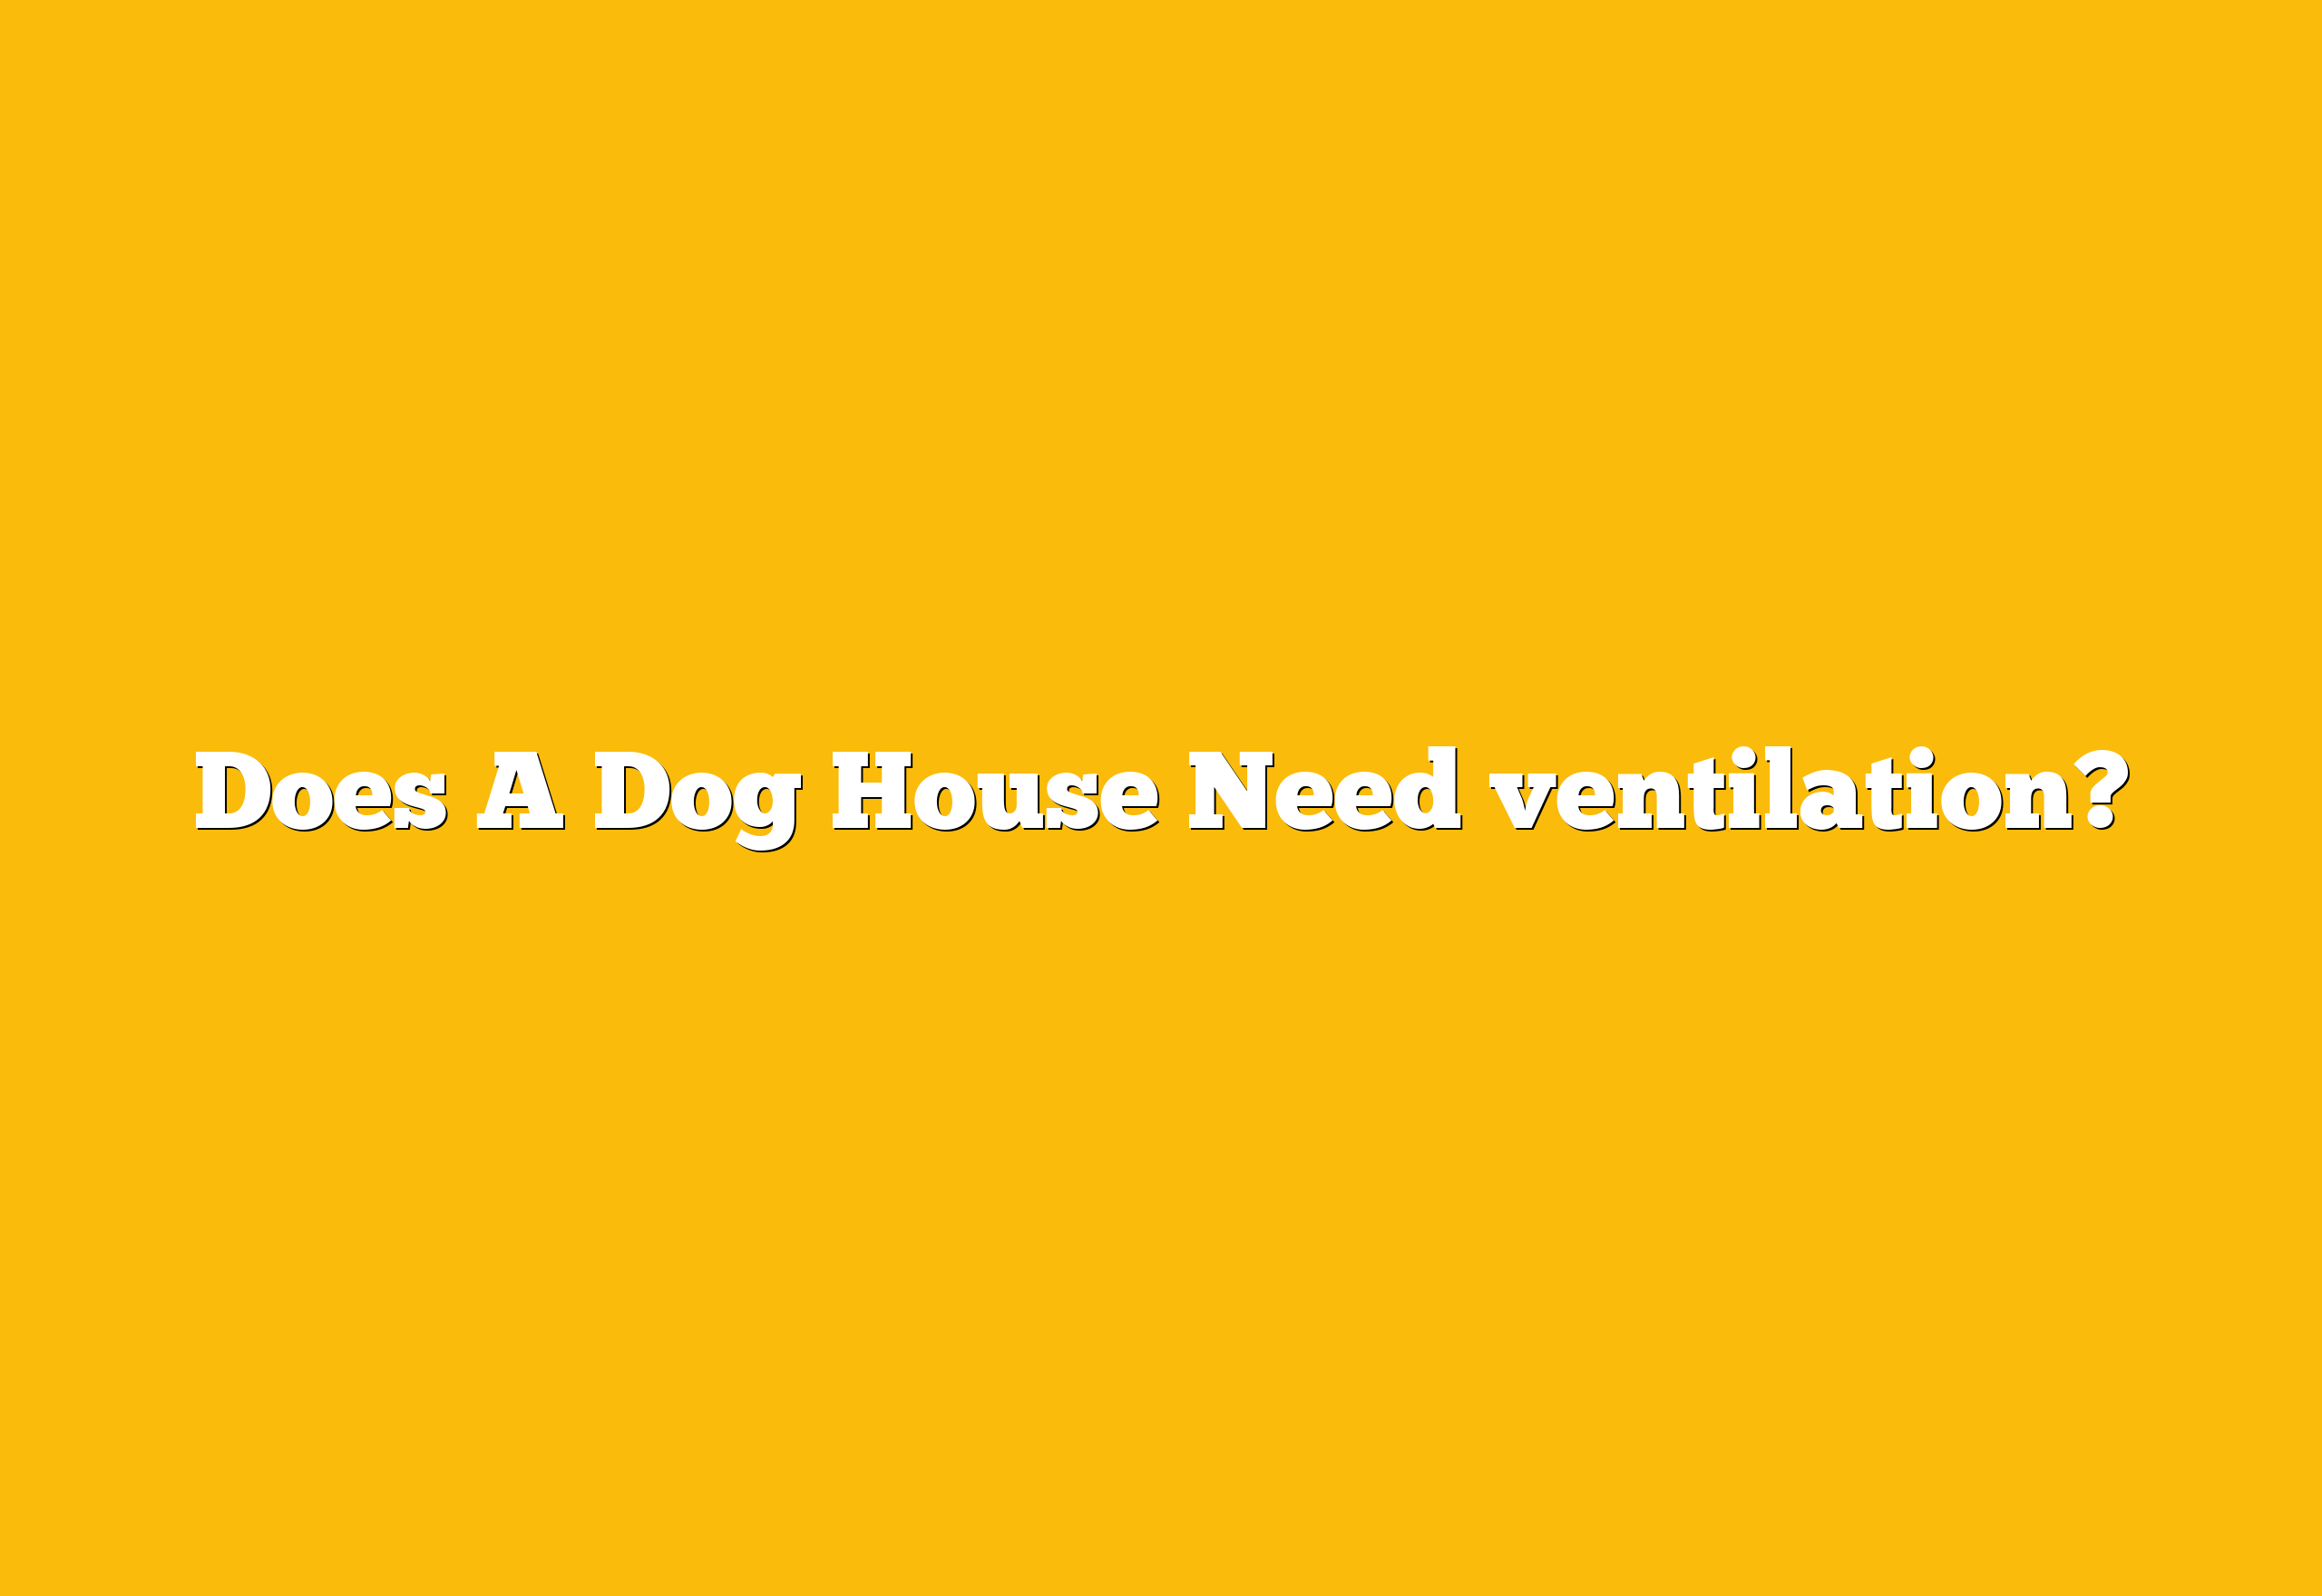 Does A Dog House Need ventilation?